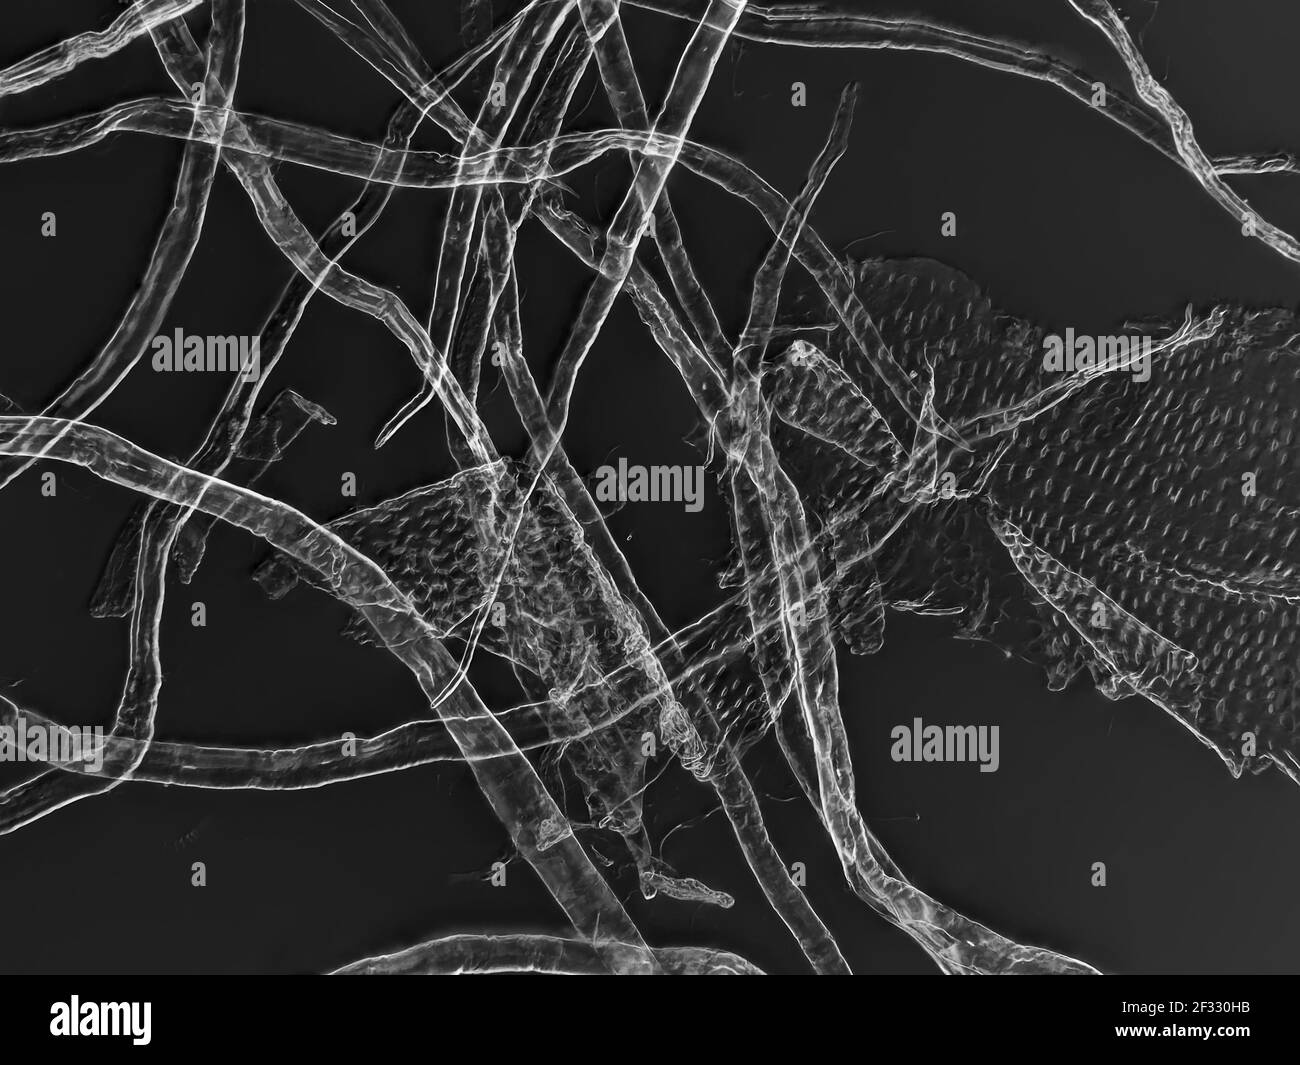 Paper Fibers Micrograph High Resolution Stock Photography and Images - Alamy